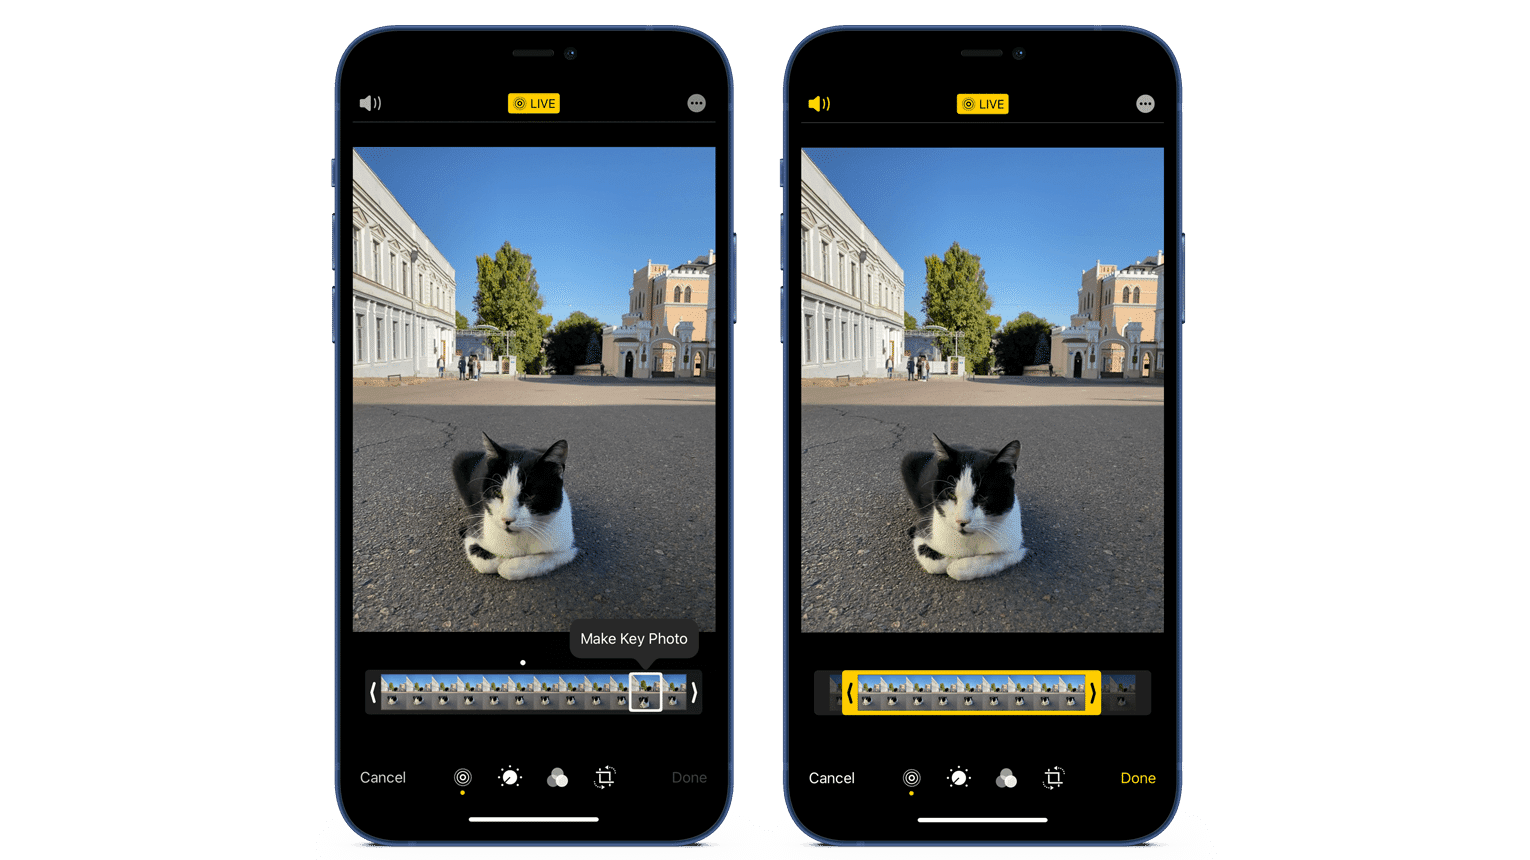 iPhone screens showing how to edit live photos on iPhone